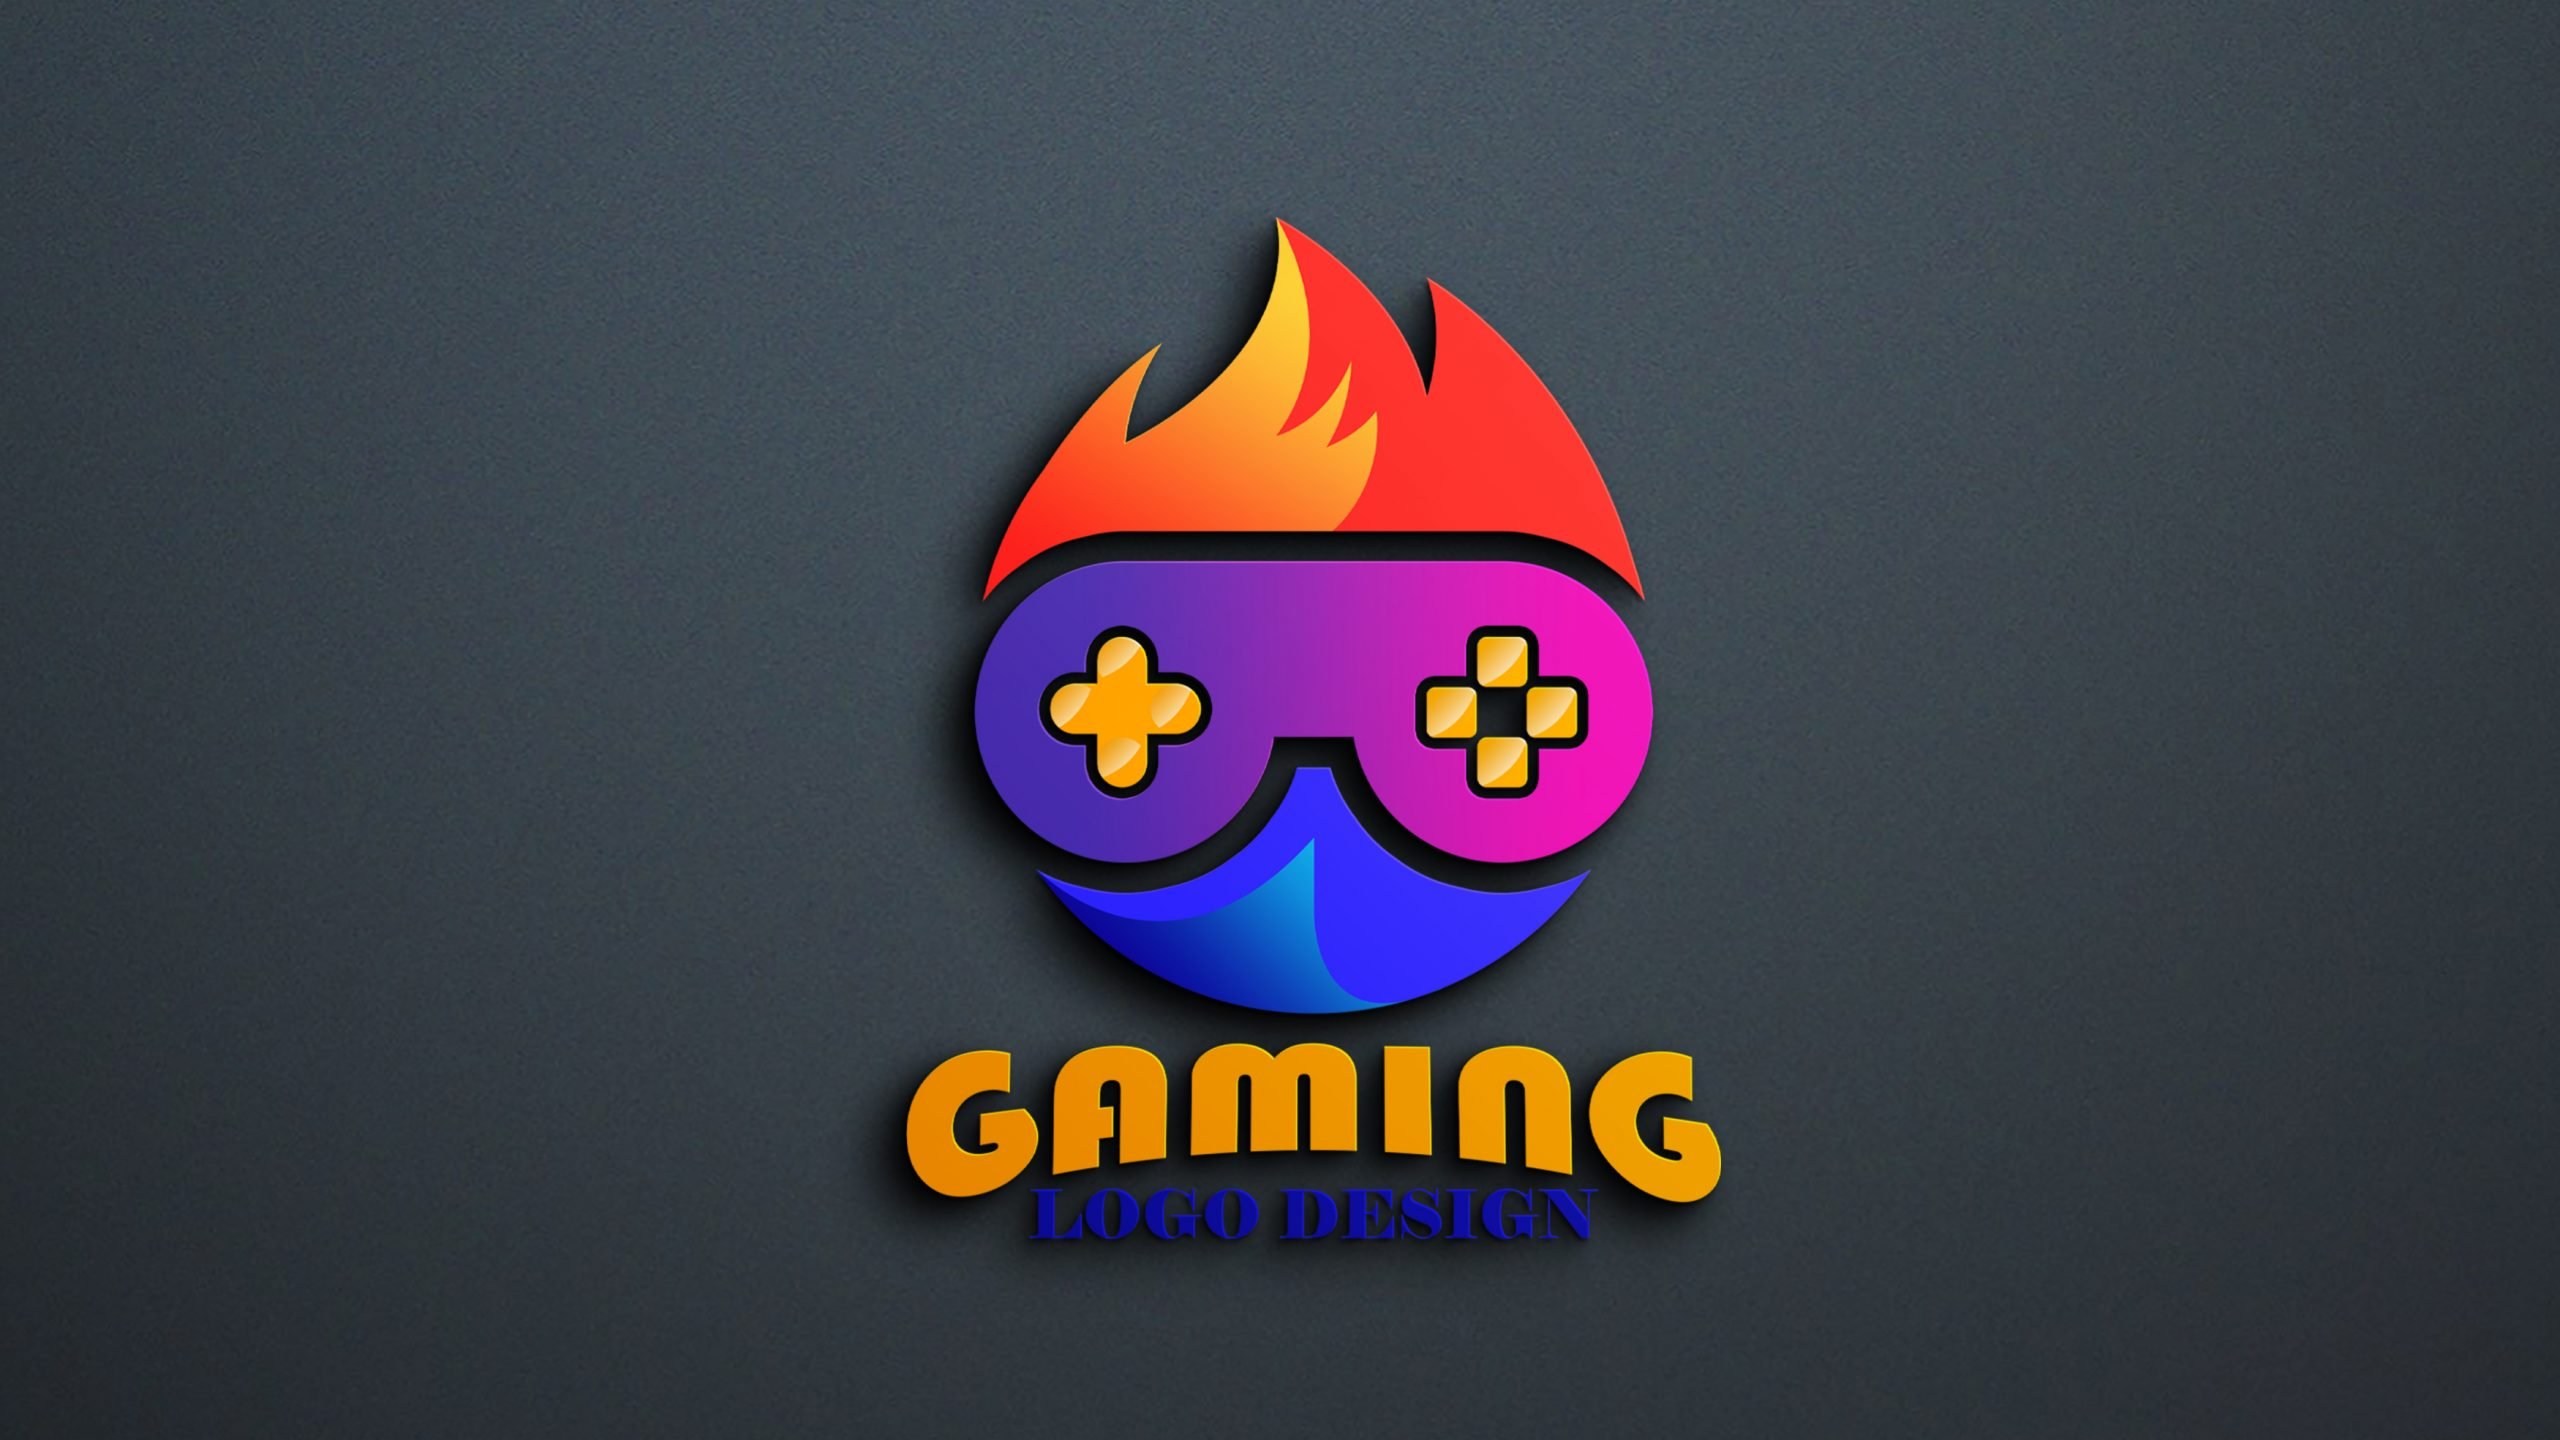 Gamer Logo Vector Art, Icons, and Graphics for Free Download